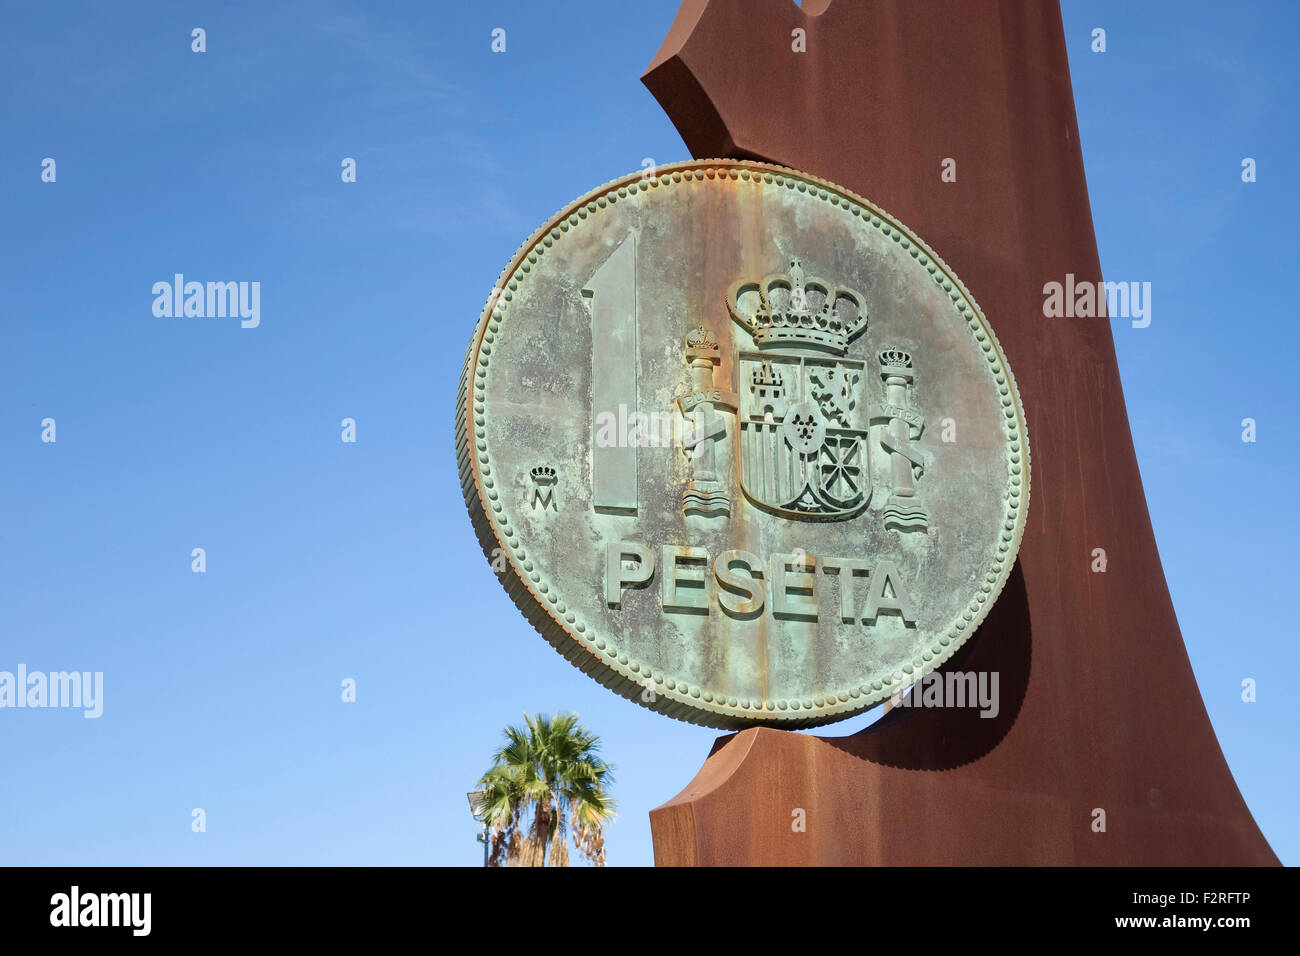 Detail of monument in commemoration of the loss of the Spanish Peseta. Fuengirola, Spain. Stock Photo